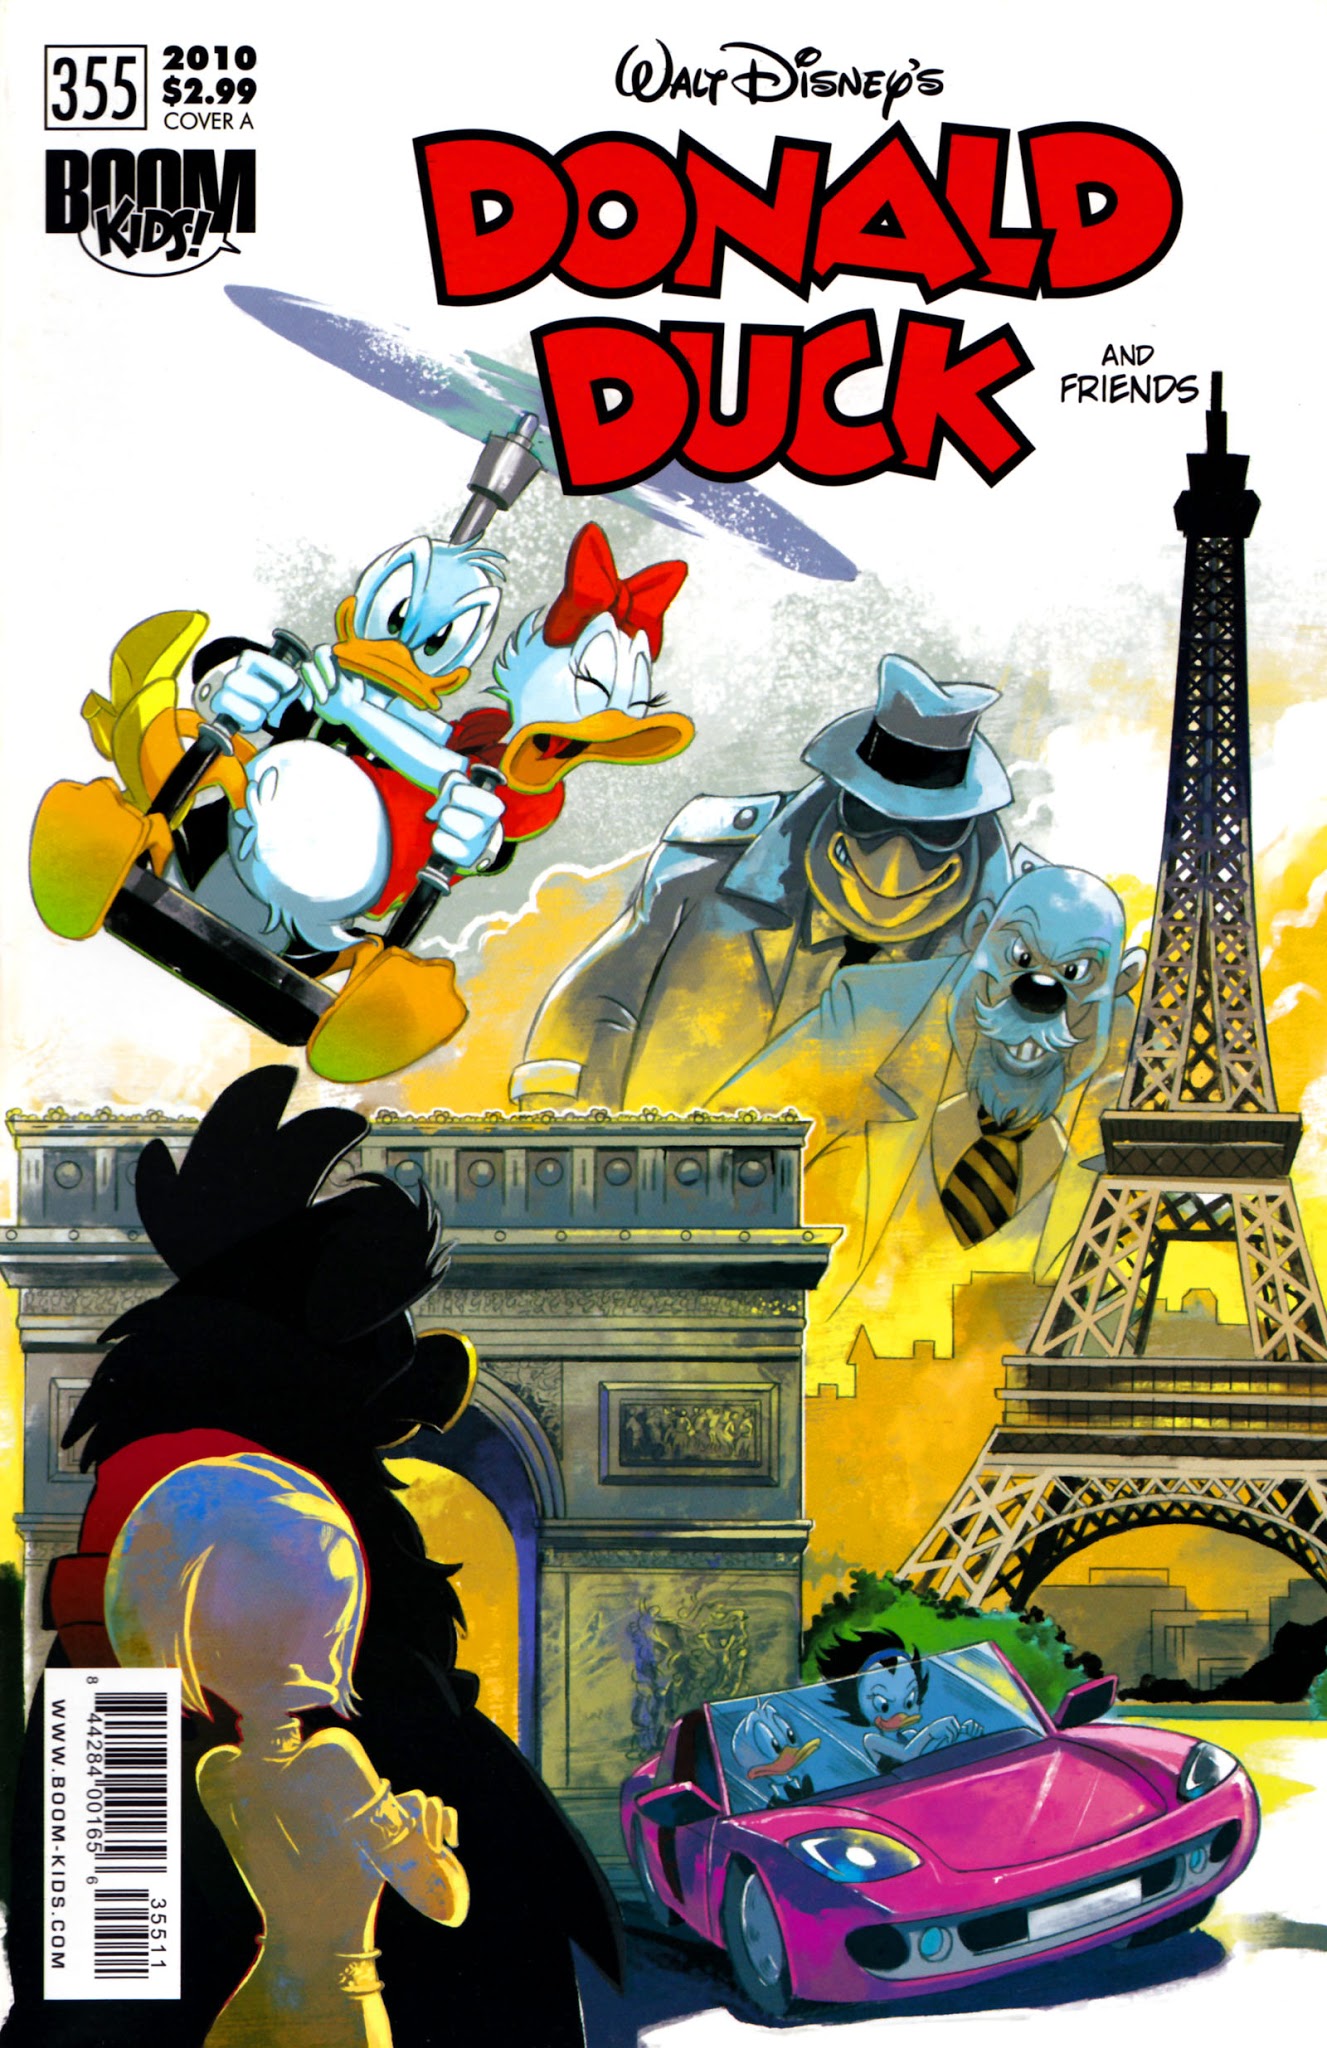 Read online Donald Duck and Friends comic -  Issue #355 - 1